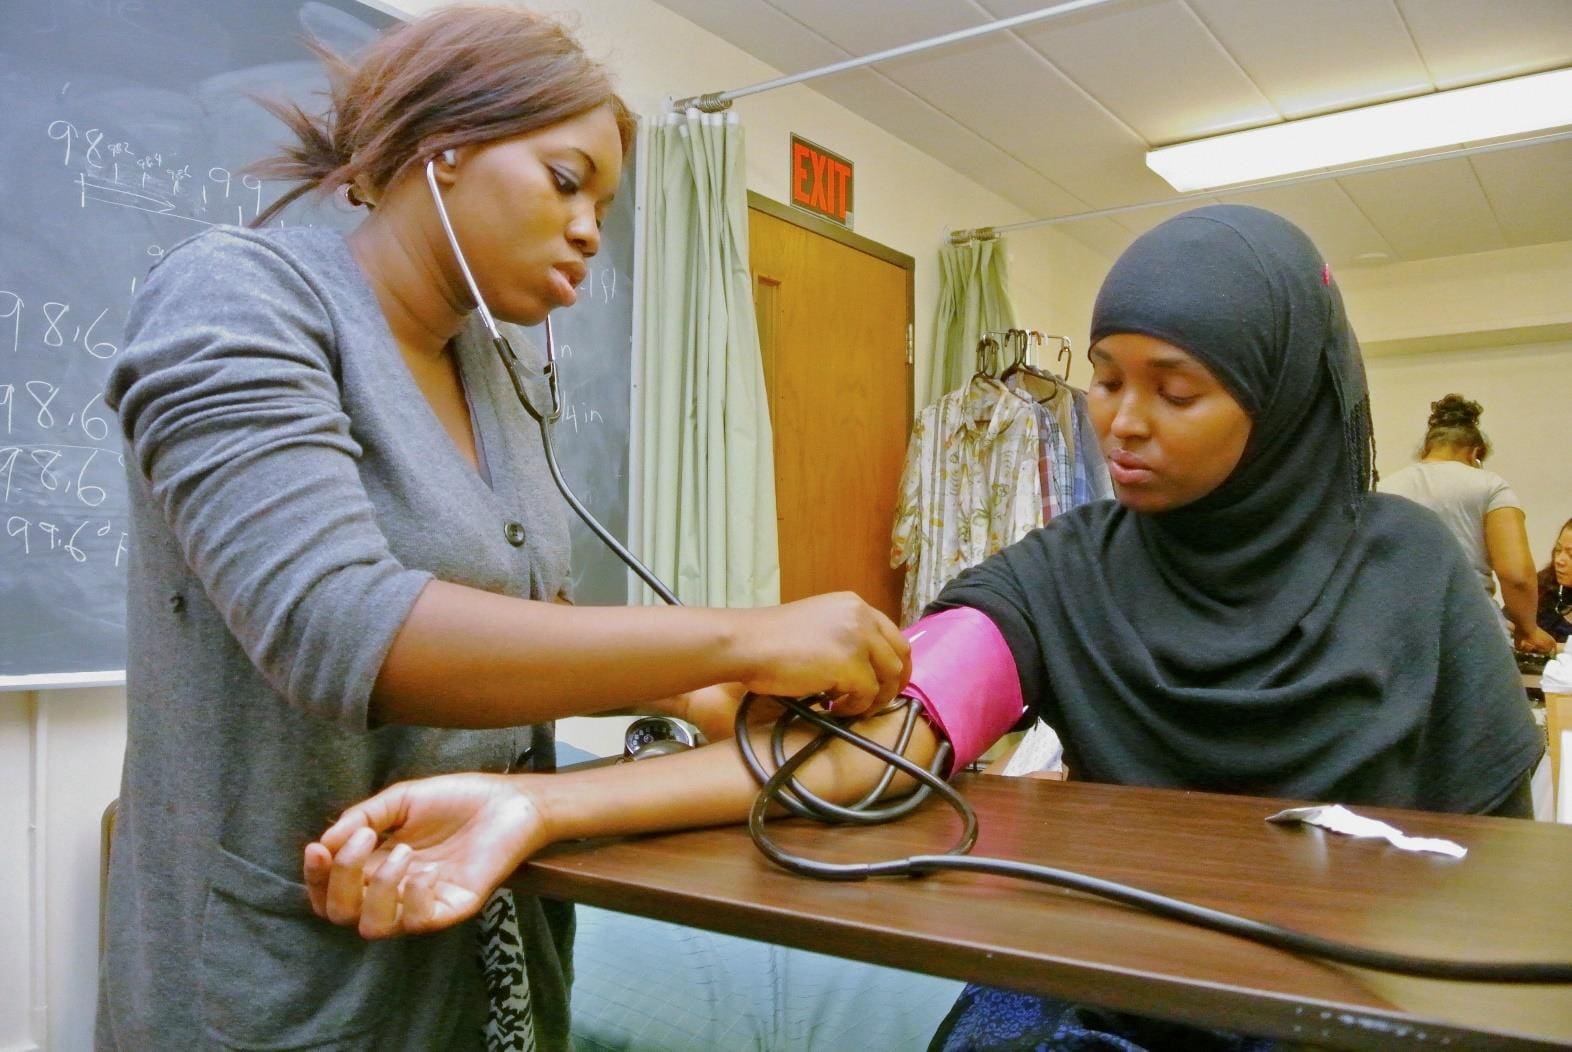 A student at the International Institute of Minnesota prepares for a healthcare career